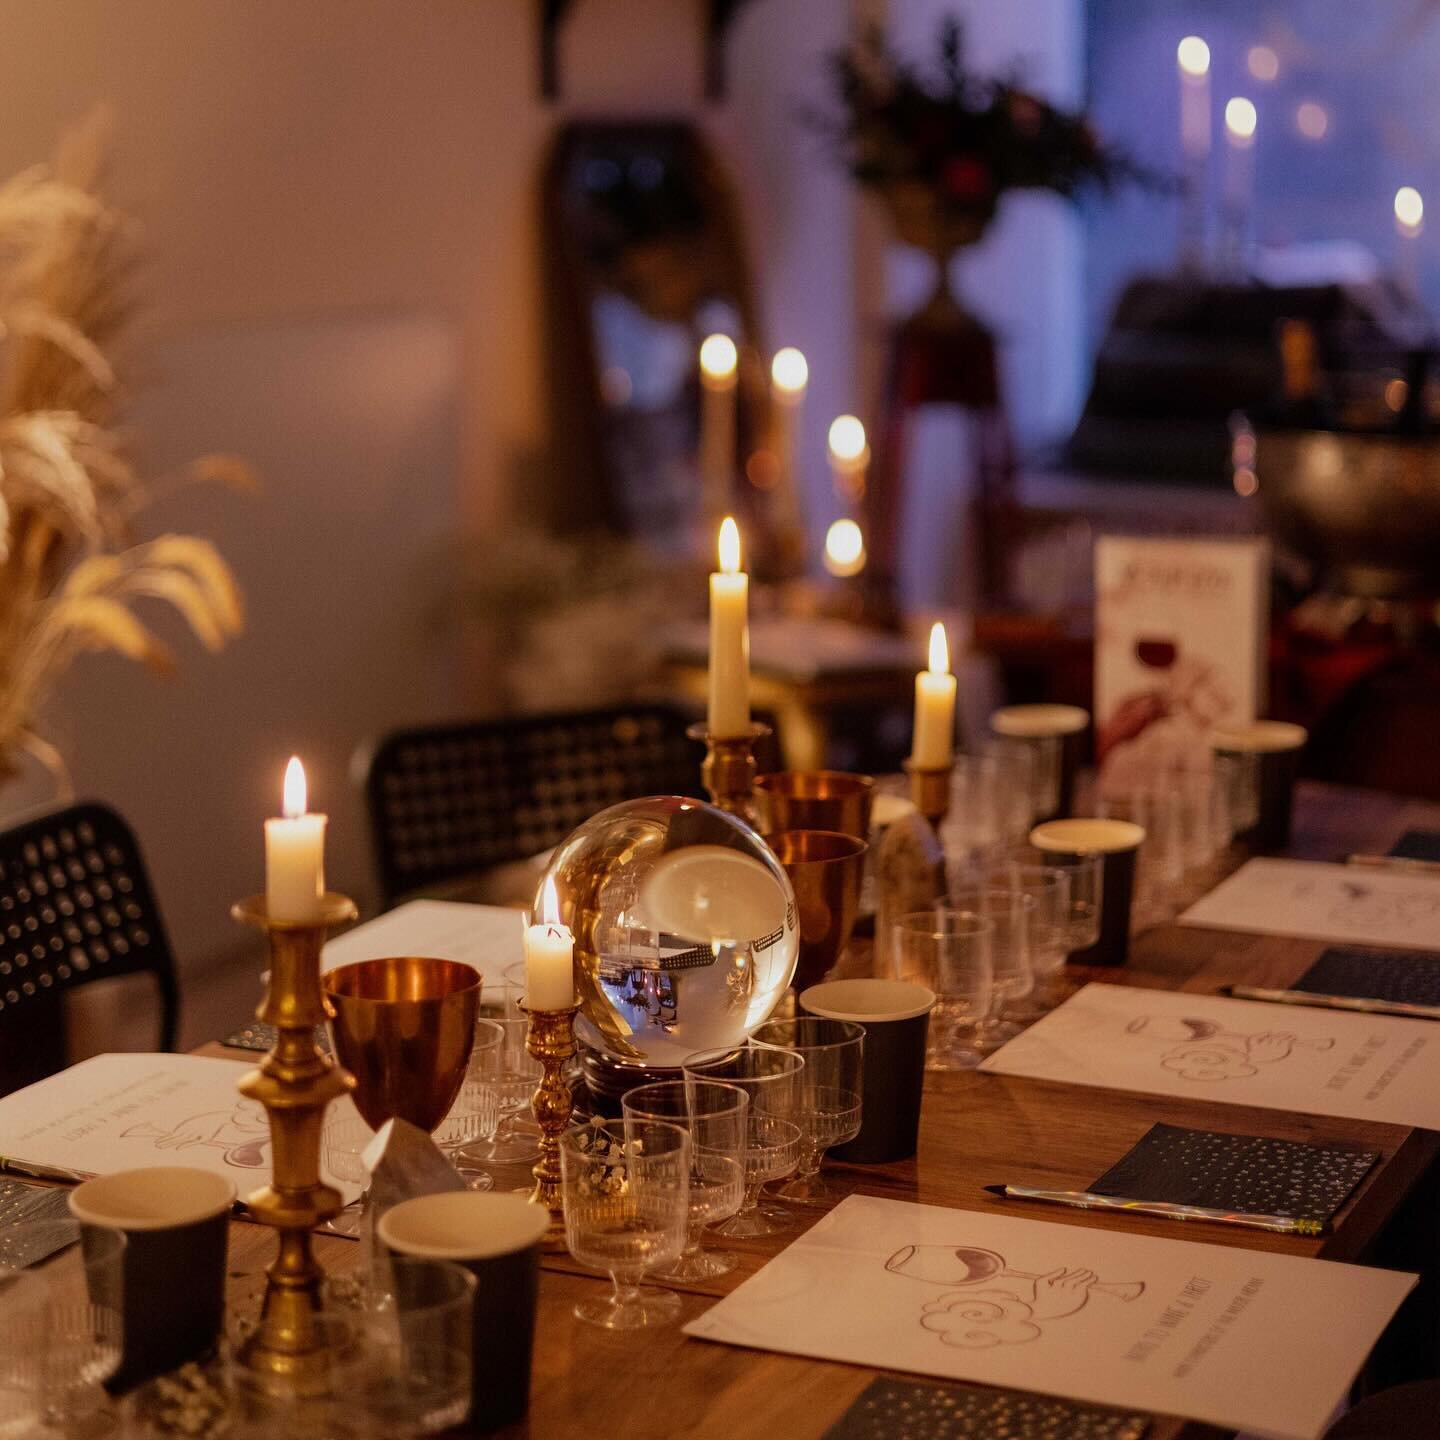 Scenes from a very magical night 🔮🍇 with the first Wine Witch Workshop in the books I&rsquo;m sending endless thanks to @mccscotland at @maeveedinburgh for hosting, @scotlandmagic for these beautiful photos and to all of our epic attendees 🥂💫
#oe